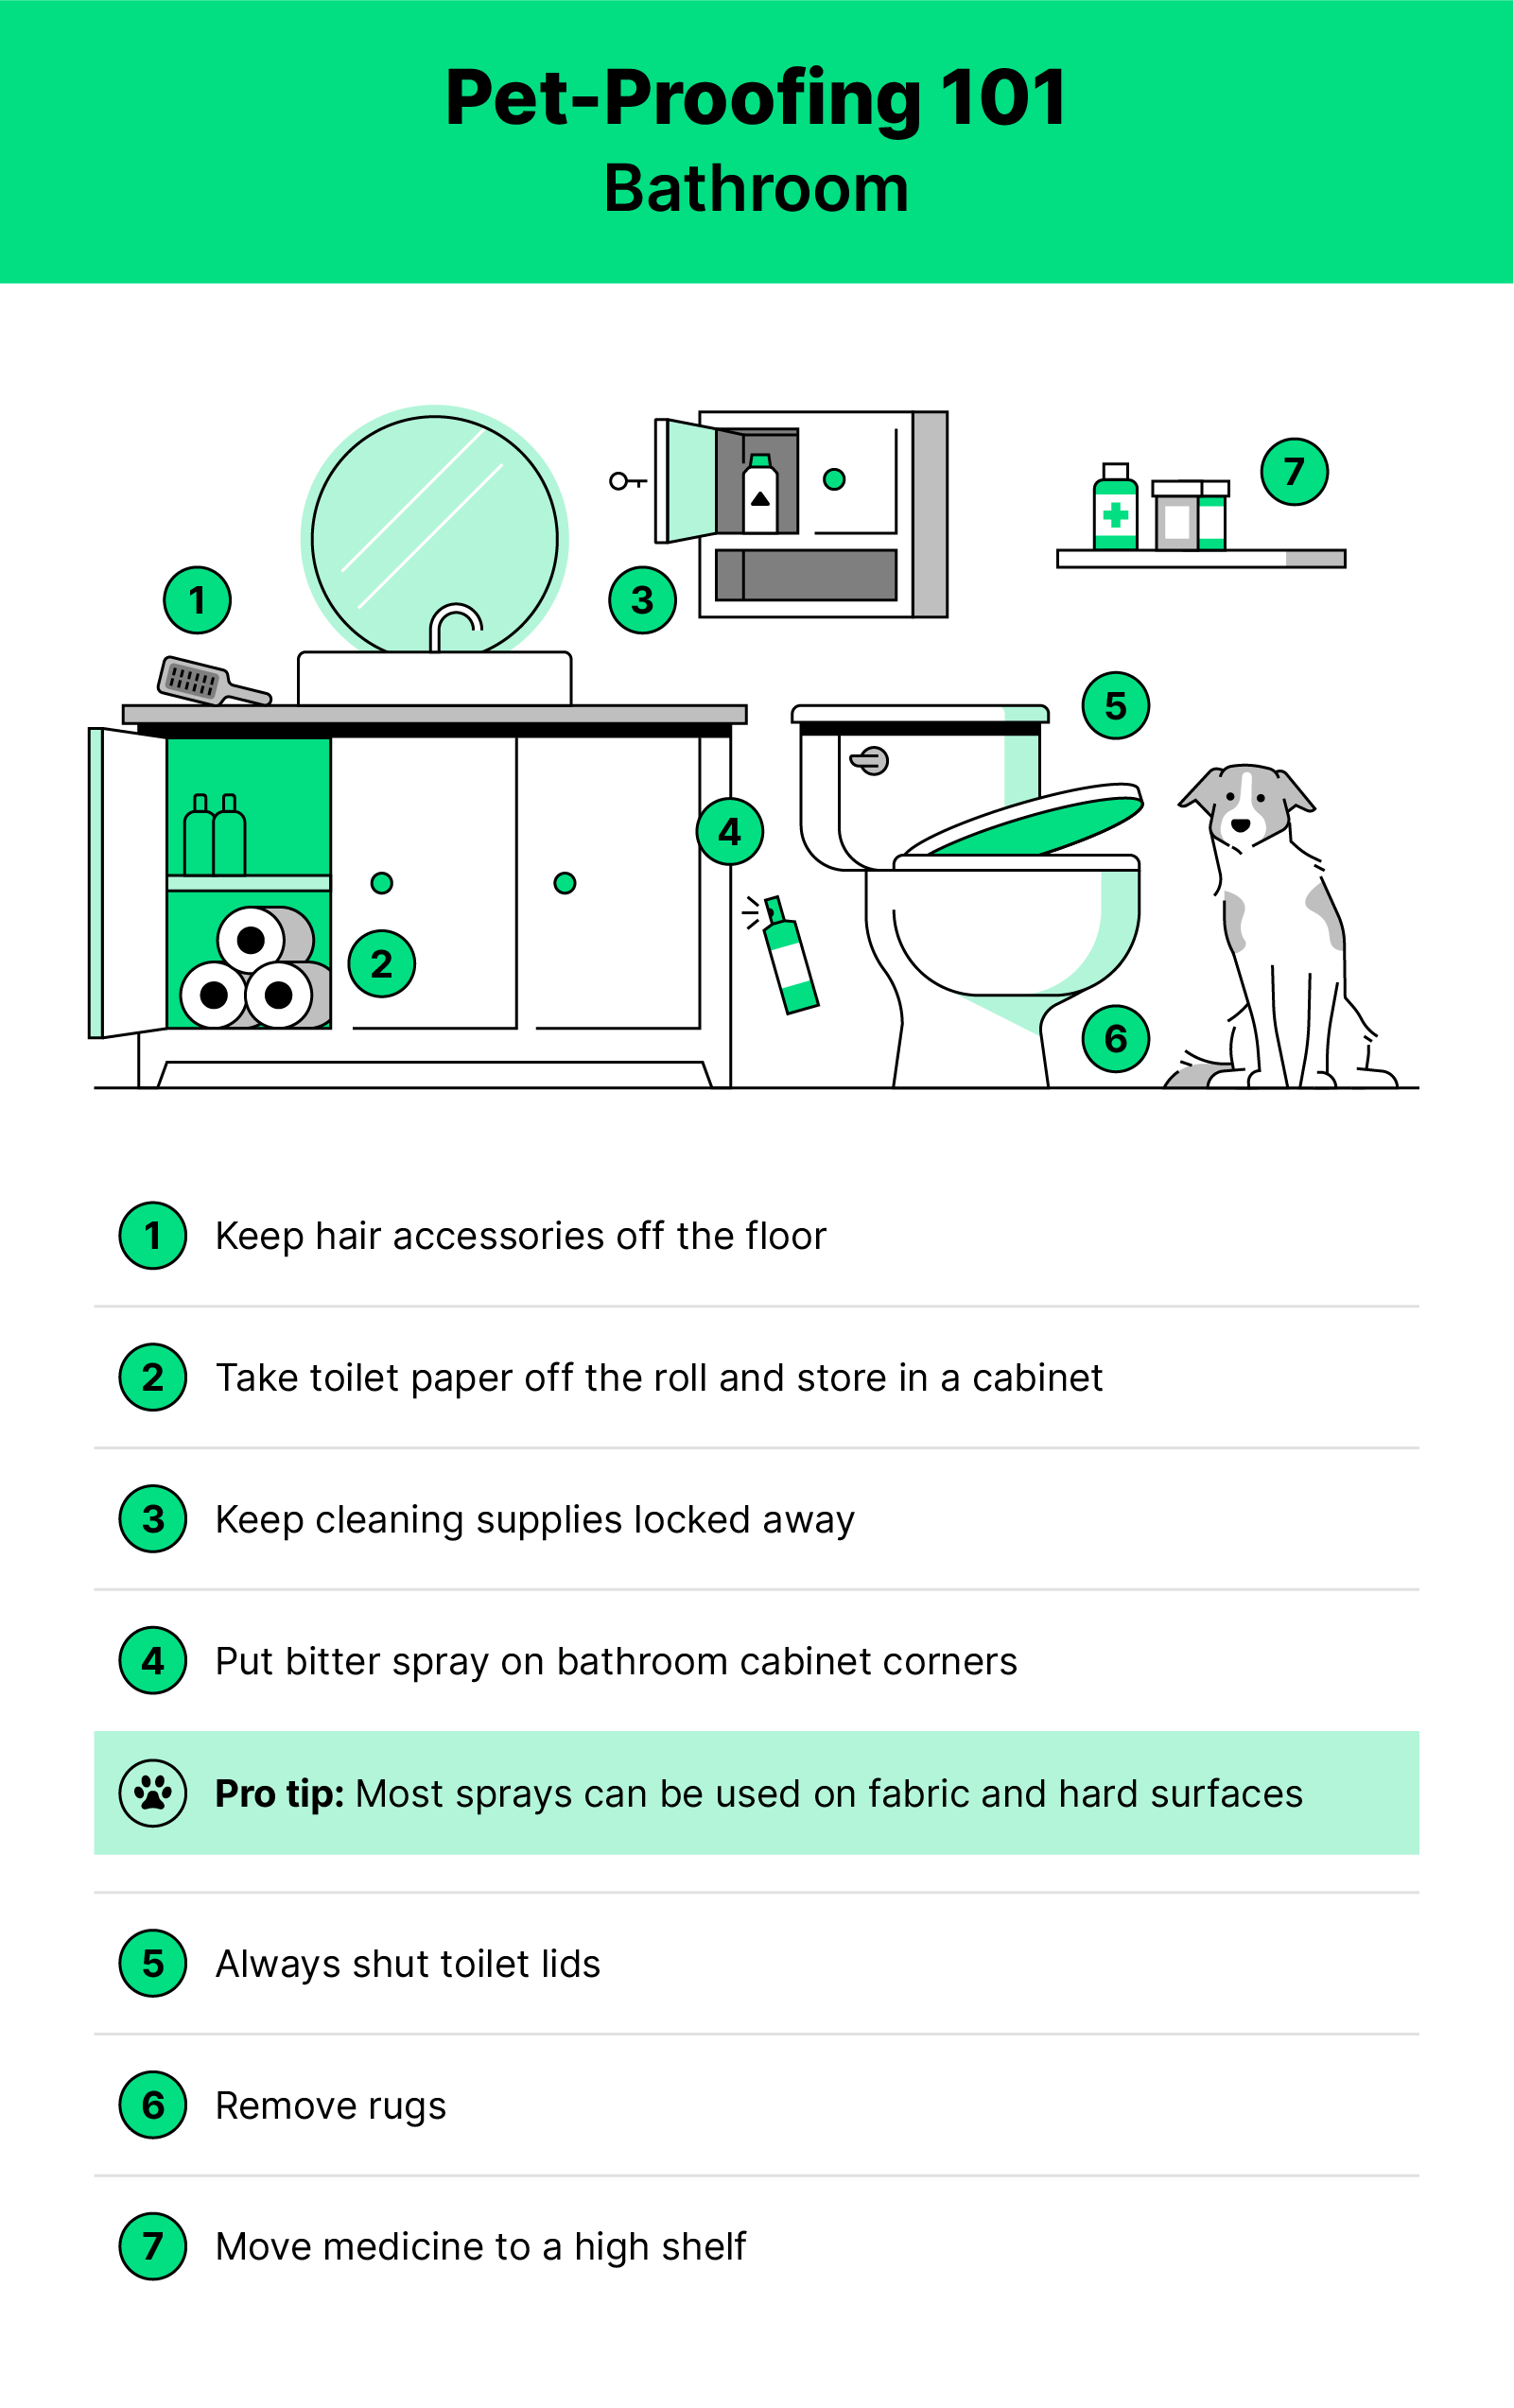 Green white and black illustration of a bathroom with a dog inside and pet proofing tips